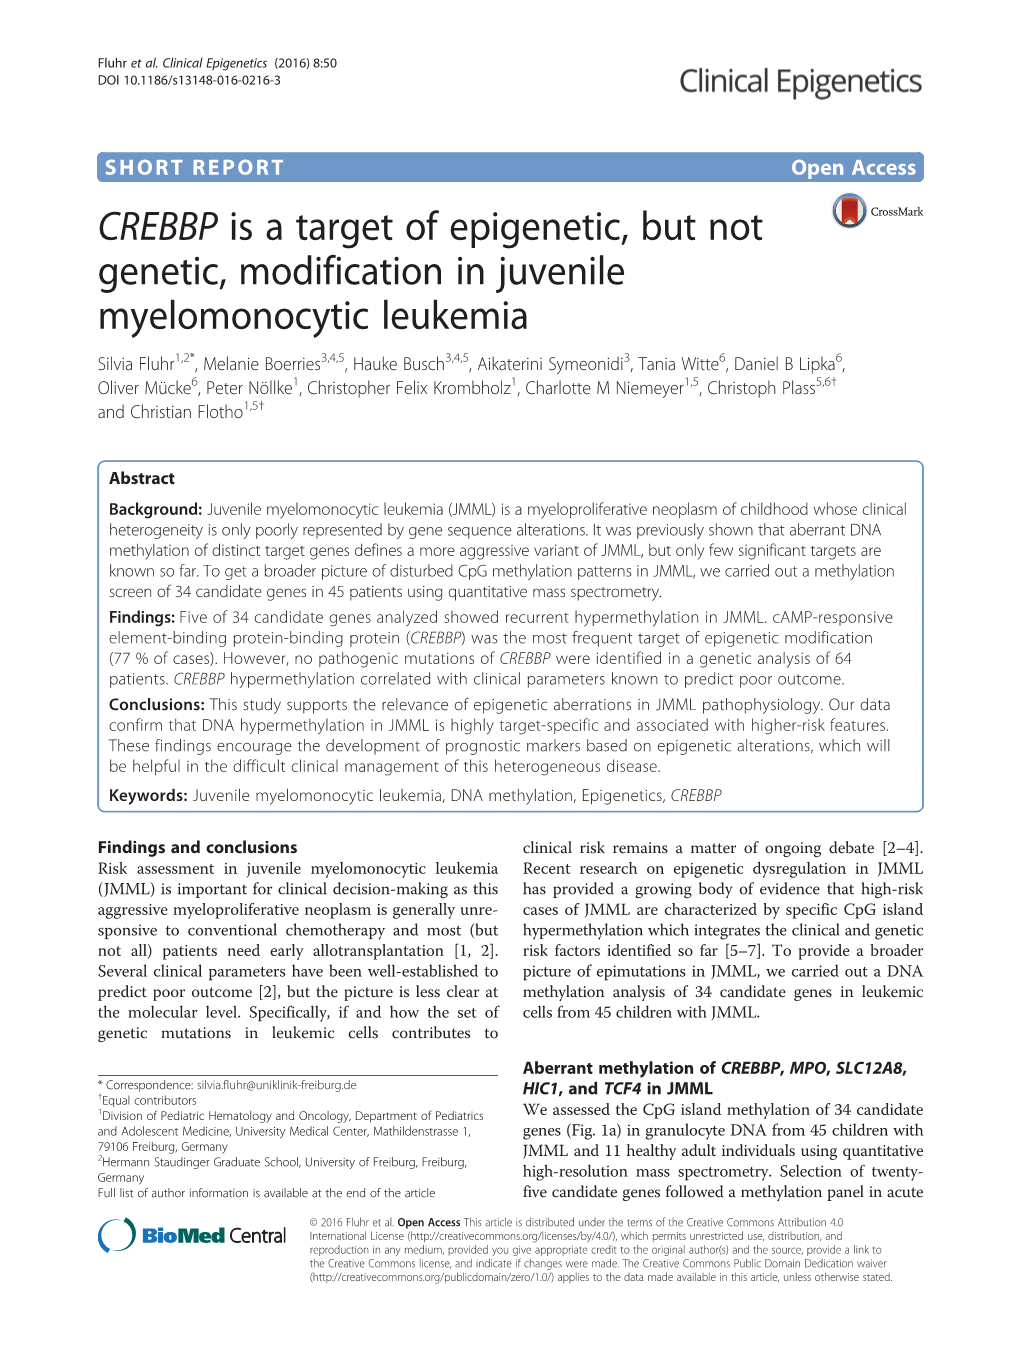 CREBBP Is a Target of Epigenetic, but Not Genetic, Modification in Juvenile